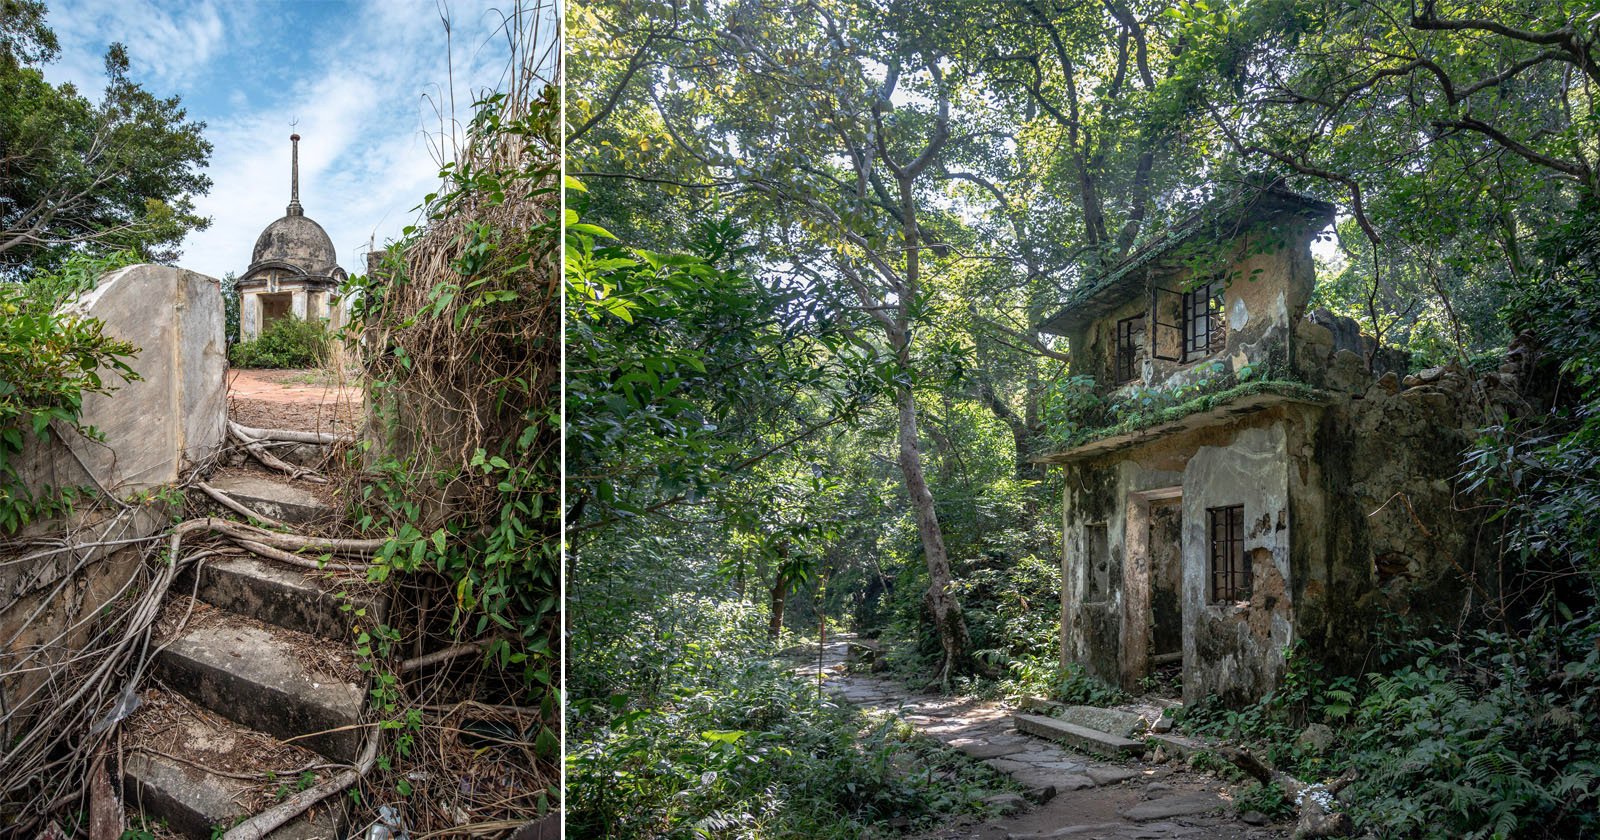 Fascinating Photos Show Hong Kong Villages Reclaimed by Nature